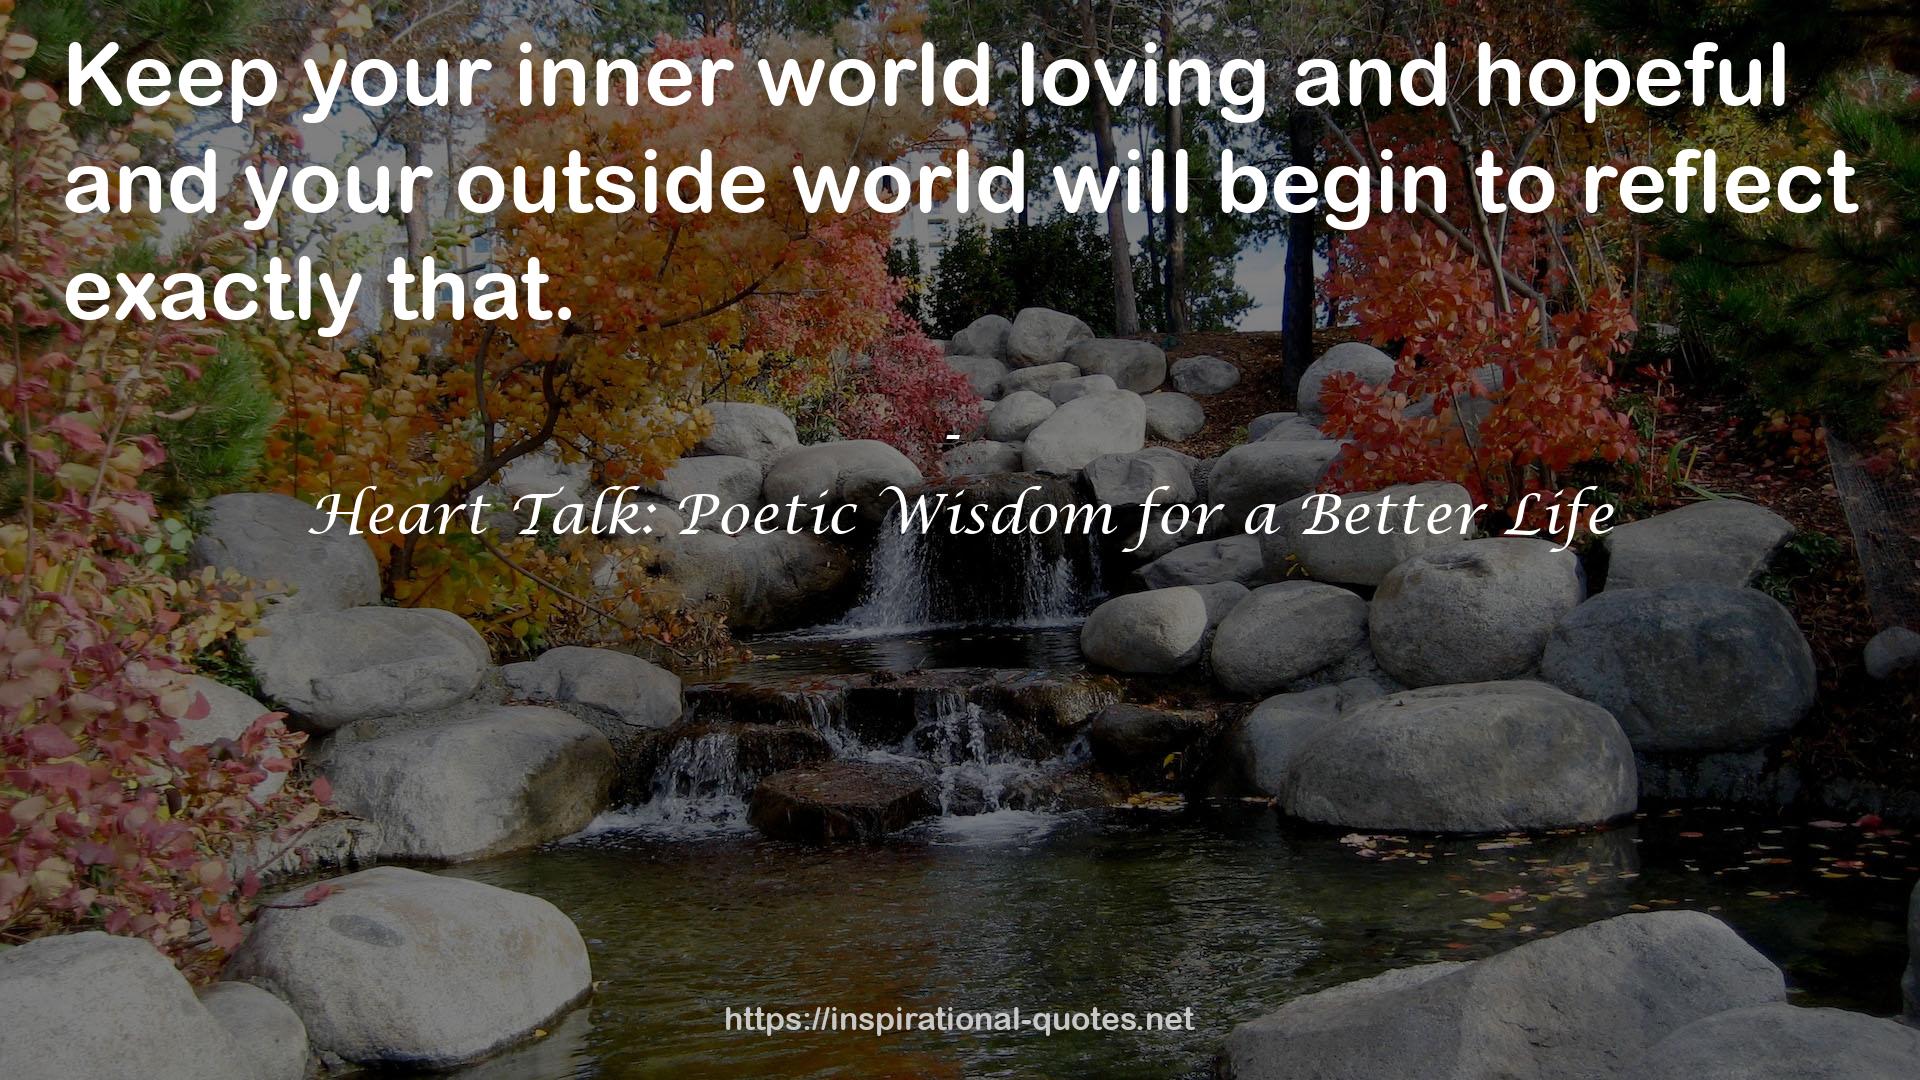 Heart Talk: Poetic Wisdom for a Better Life QUOTES